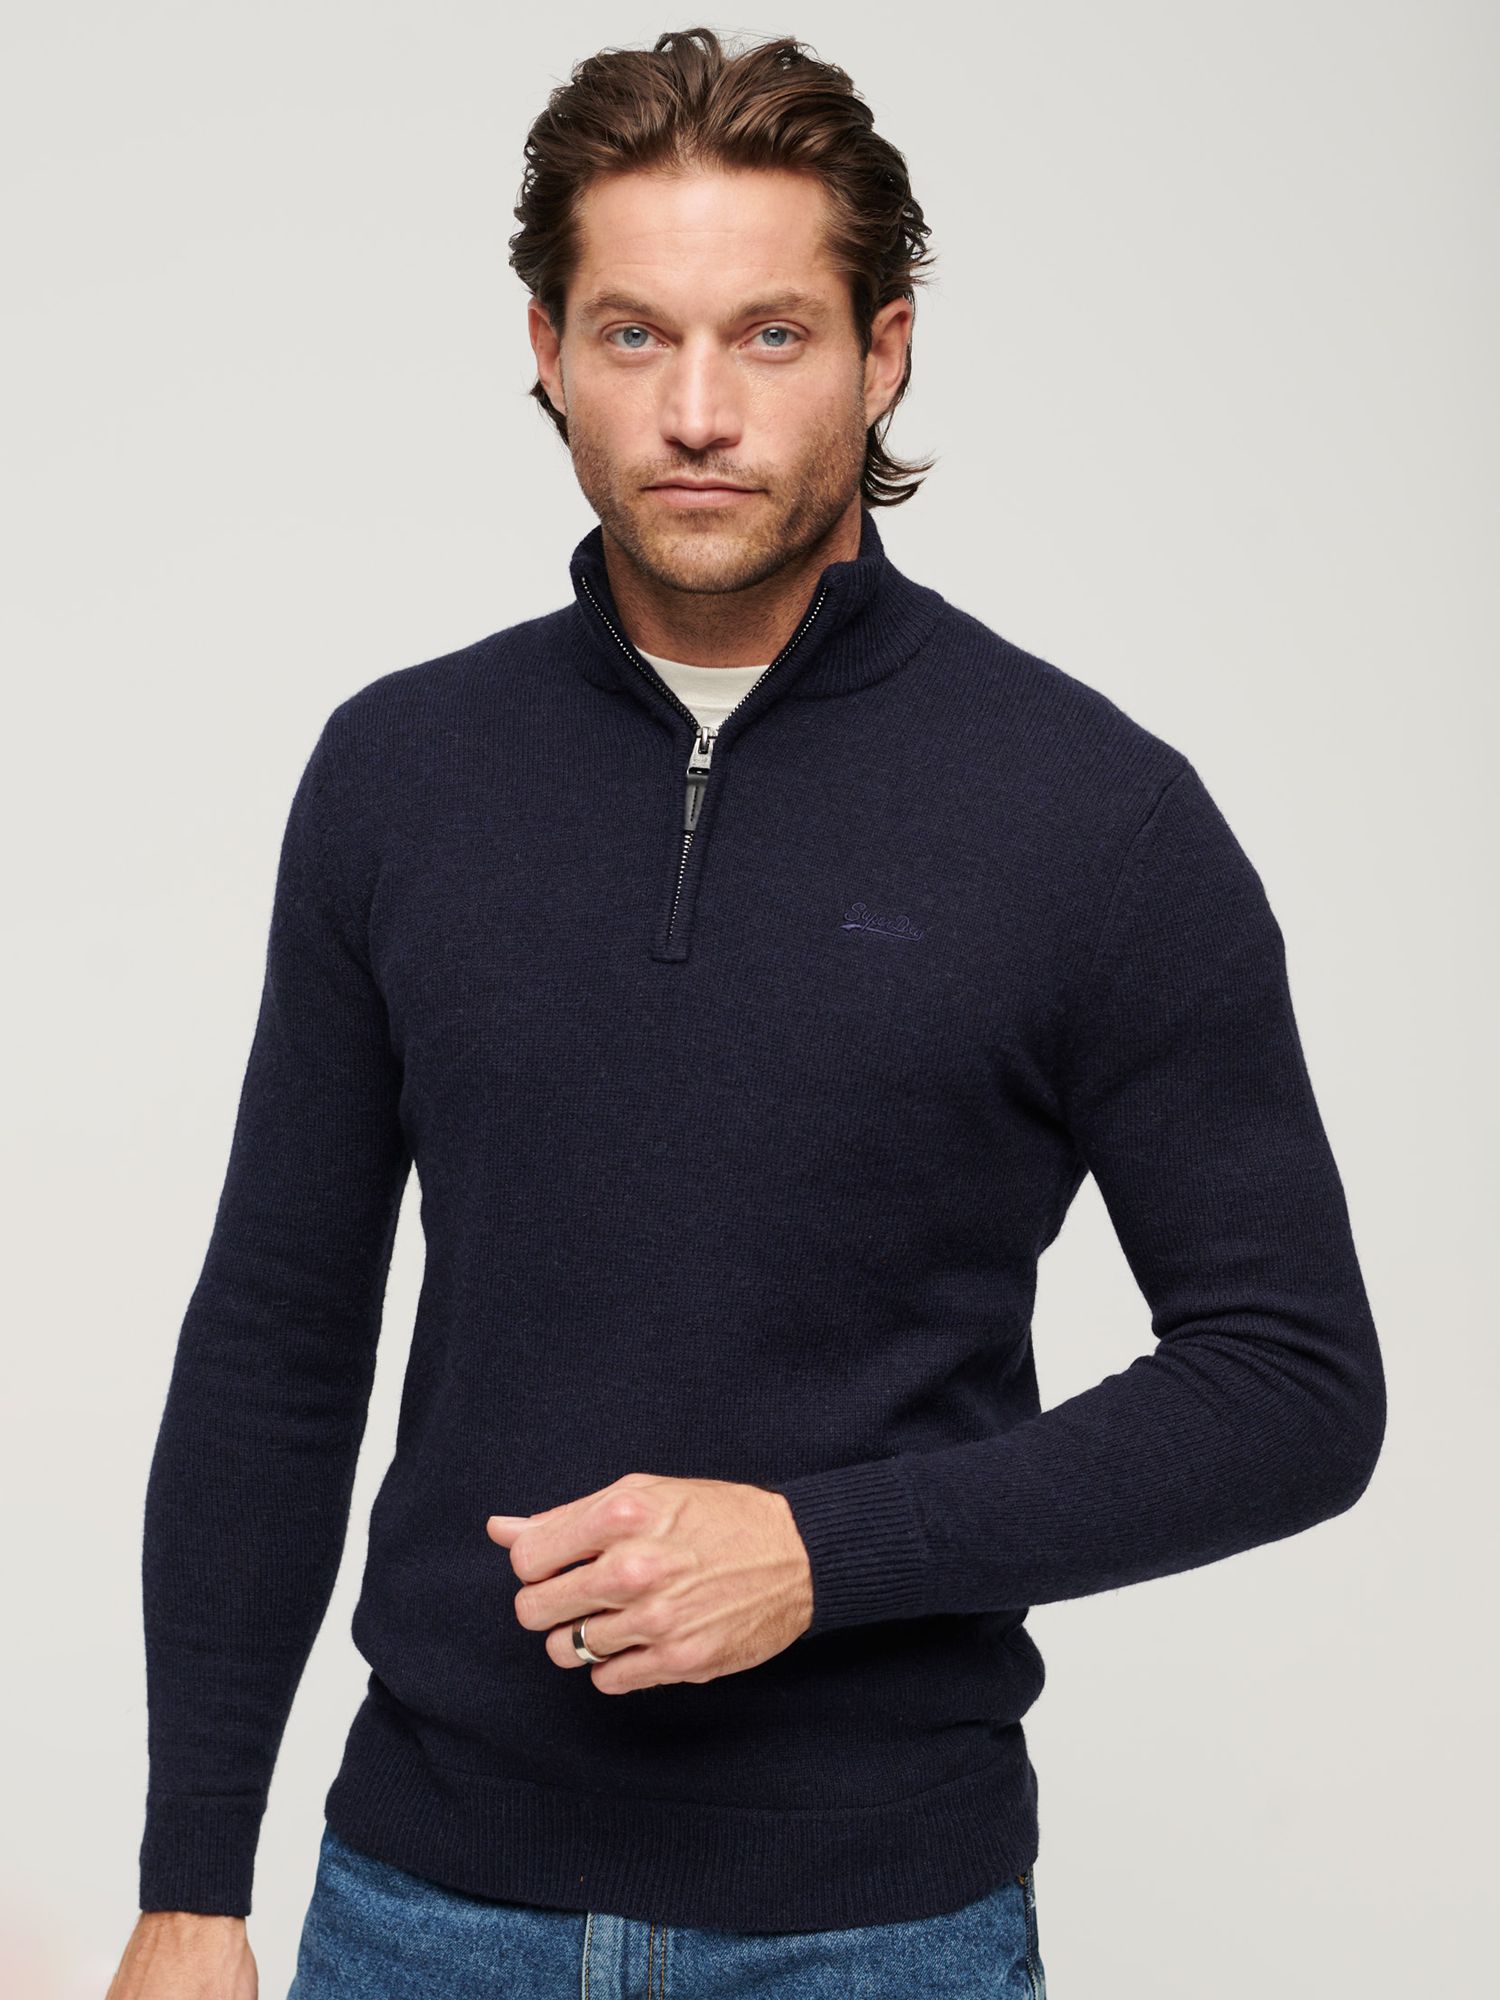 Superdry Essential Embroidered Knit Henley Jumper, Carbon Navy